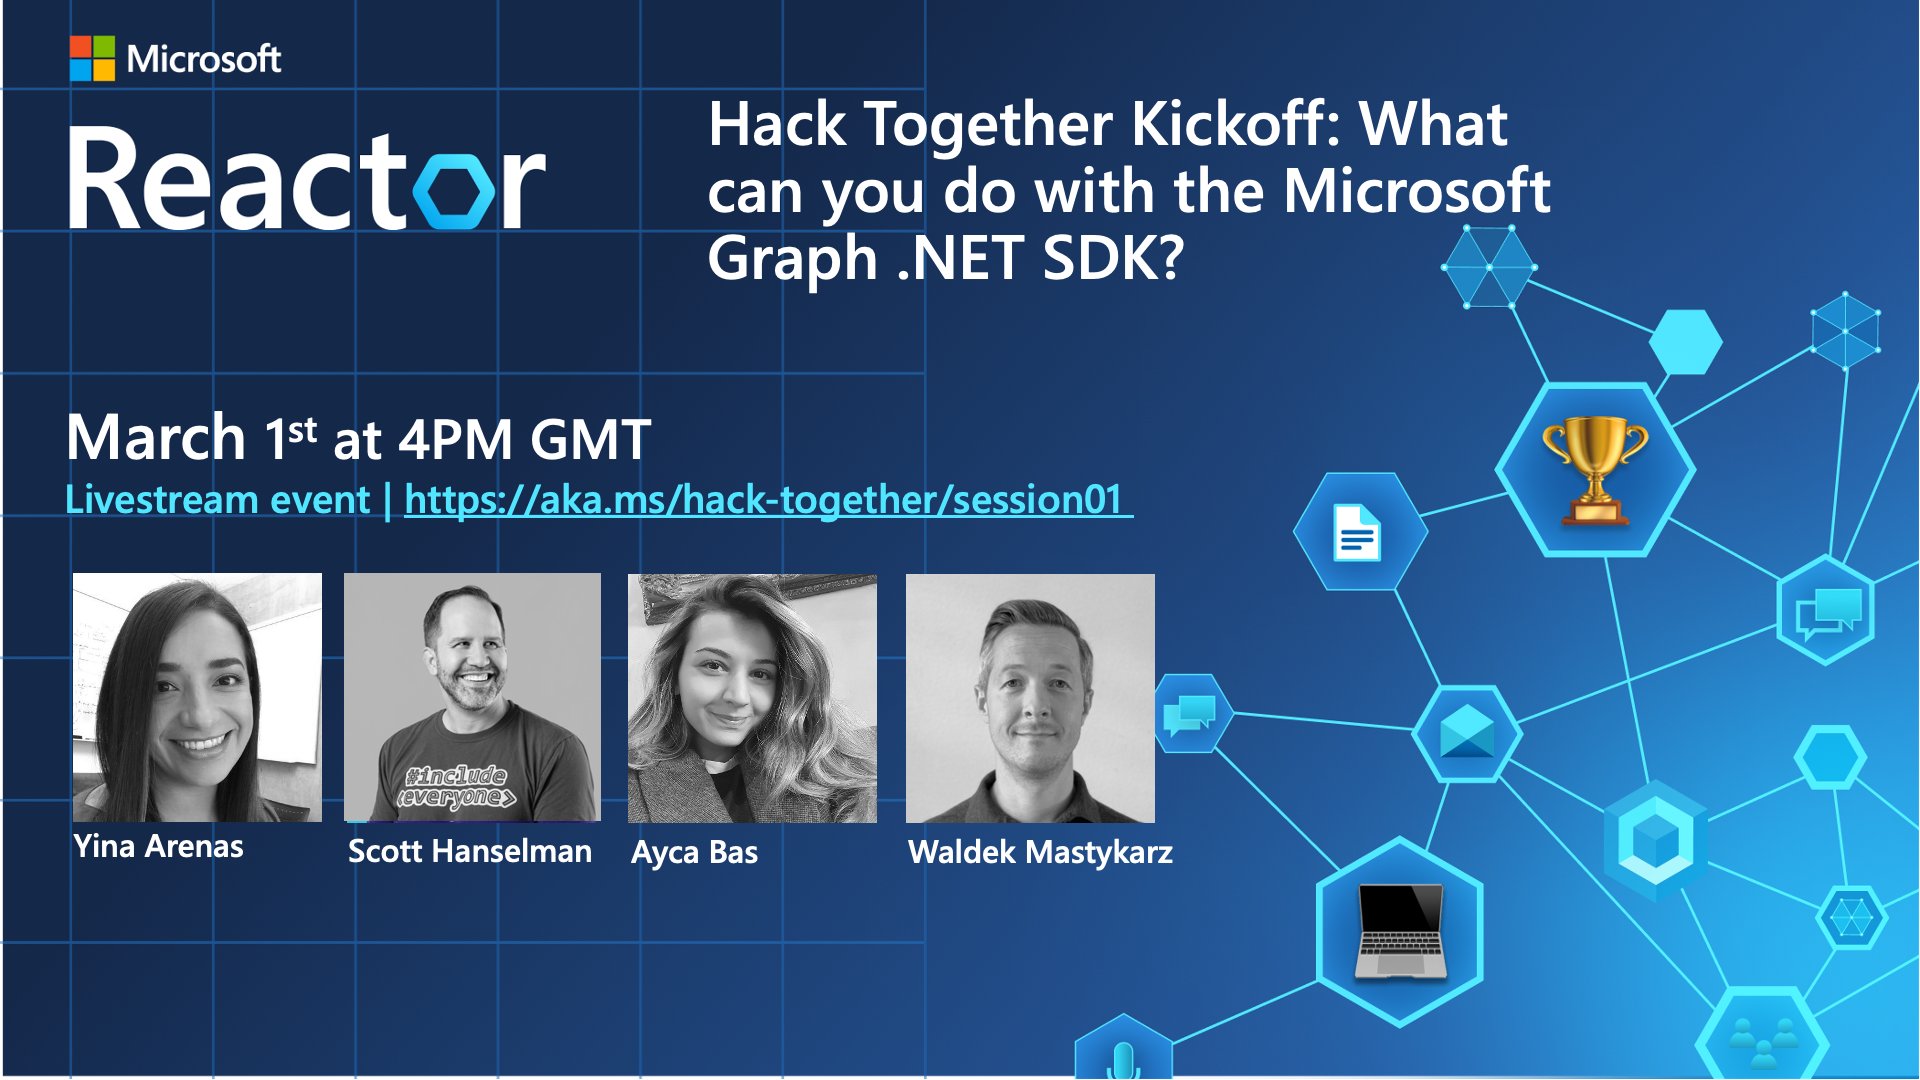 Microsoft 365 Developer on X: Join us to kick off Hack Together